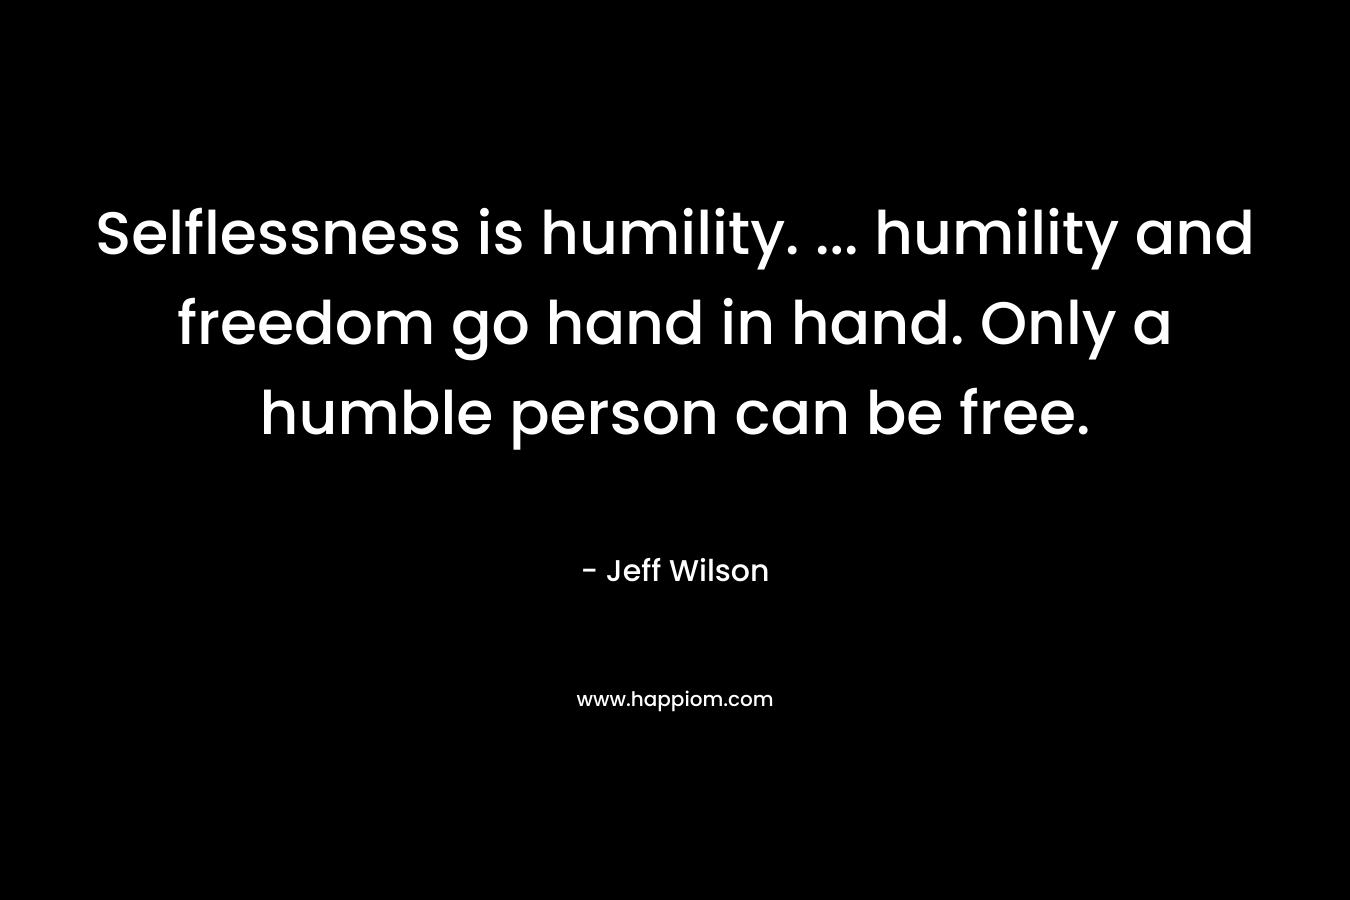 Selflessness is humility. … humility and freedom go hand in hand. Only a humble person can be free. – Jeff Wilson